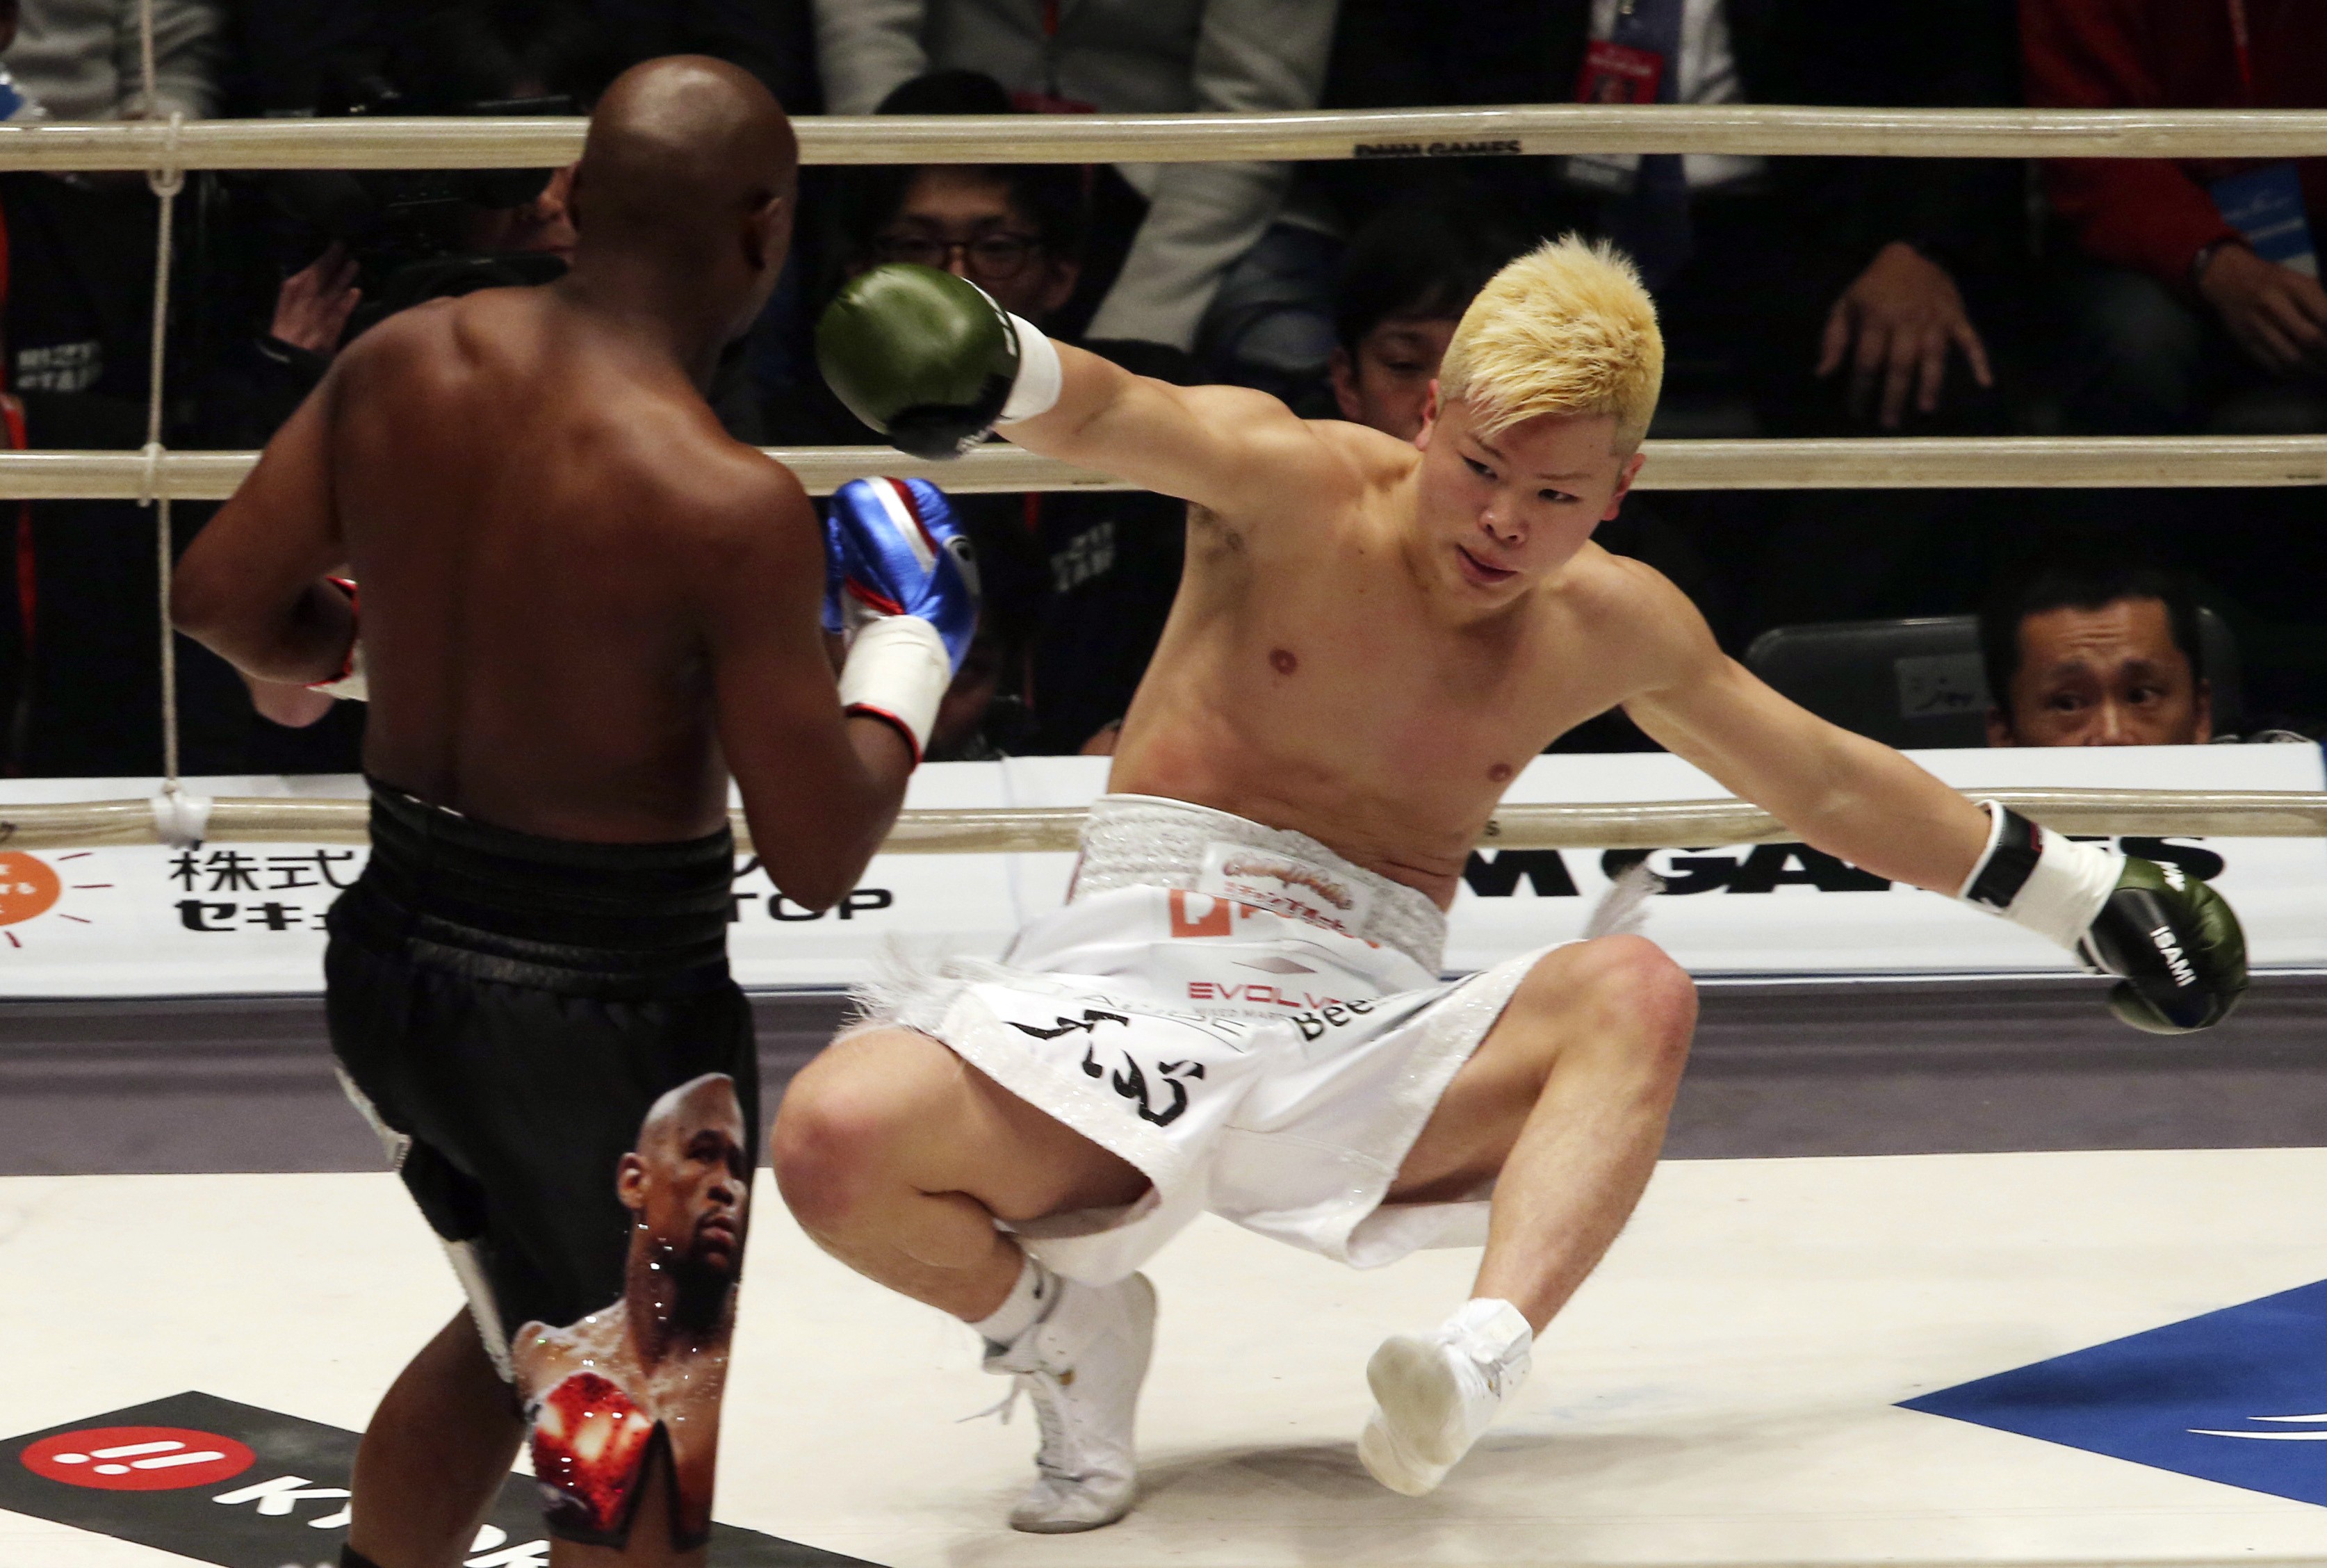 Japanese kick-boxer Tenshin Nasukawa is on his way to the canvas after being hit by Floyd Mayweather Jnr in their exhibition fight in Saitama. Photo: AP